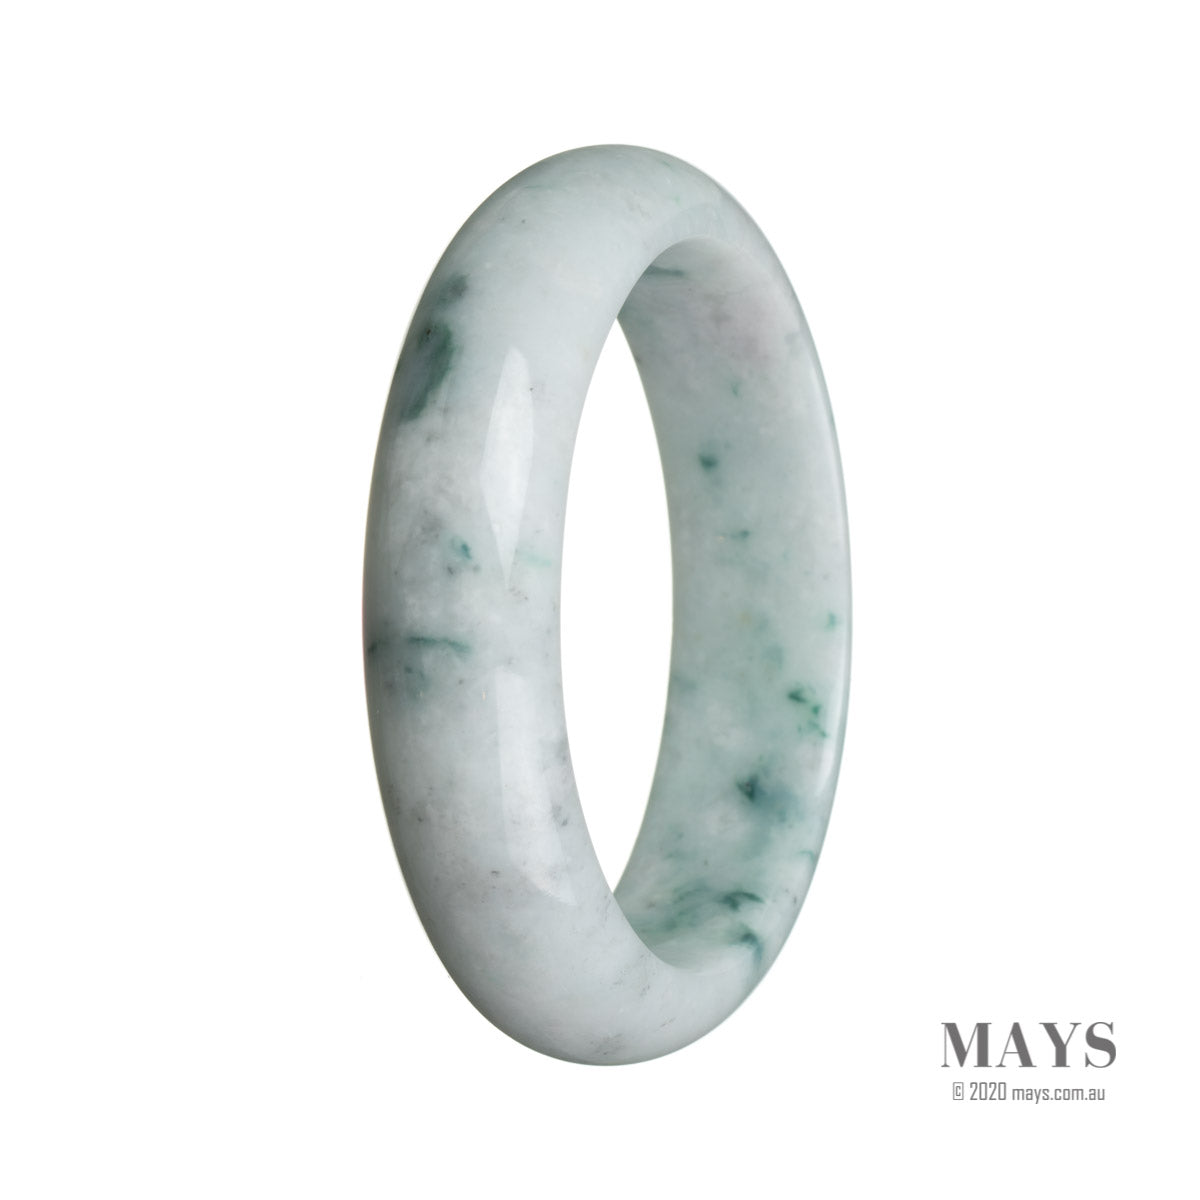 A beautiful white Burma Jade bangle bracelet with a half moon shape. Perfect for adding an authentic and elegant touch to any outfit.